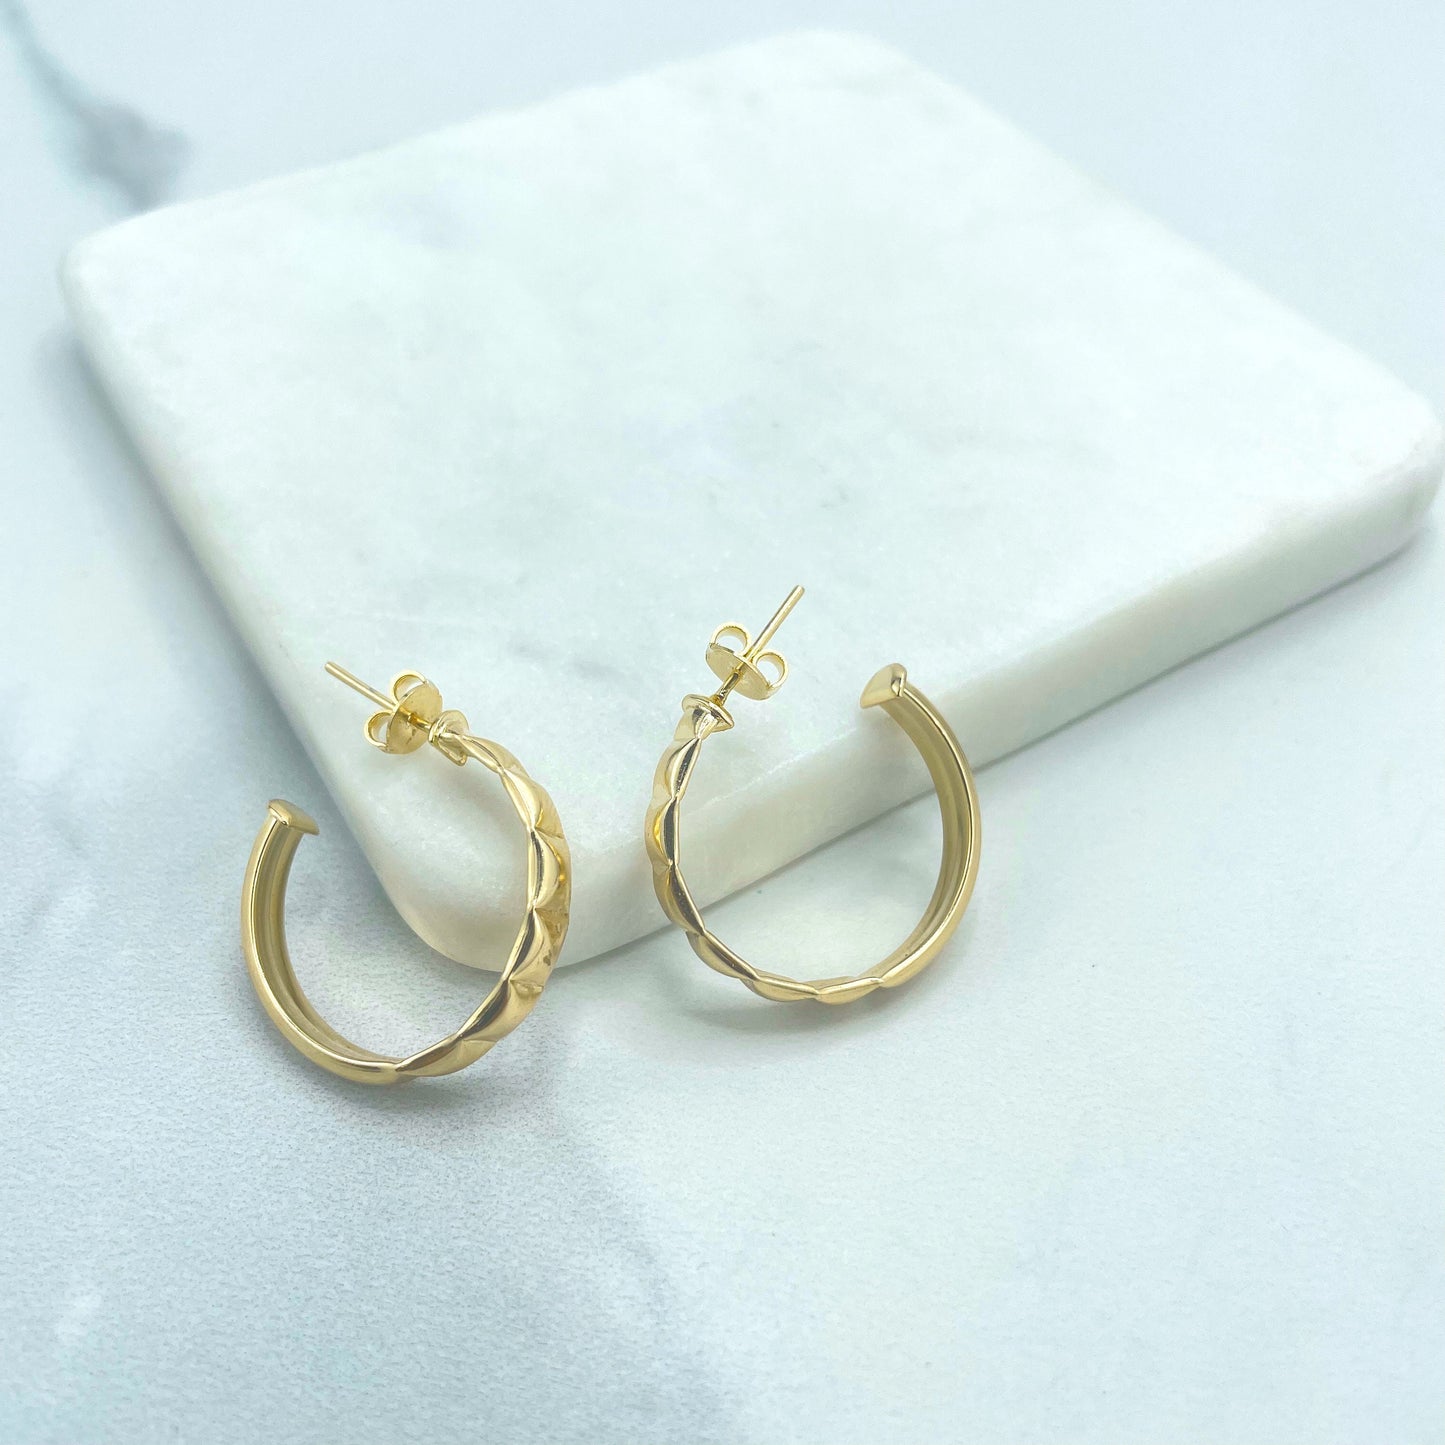 18k Gold Filled Square Texturized C-Hoops Earrings Wholesale Jewelry Making Supplies